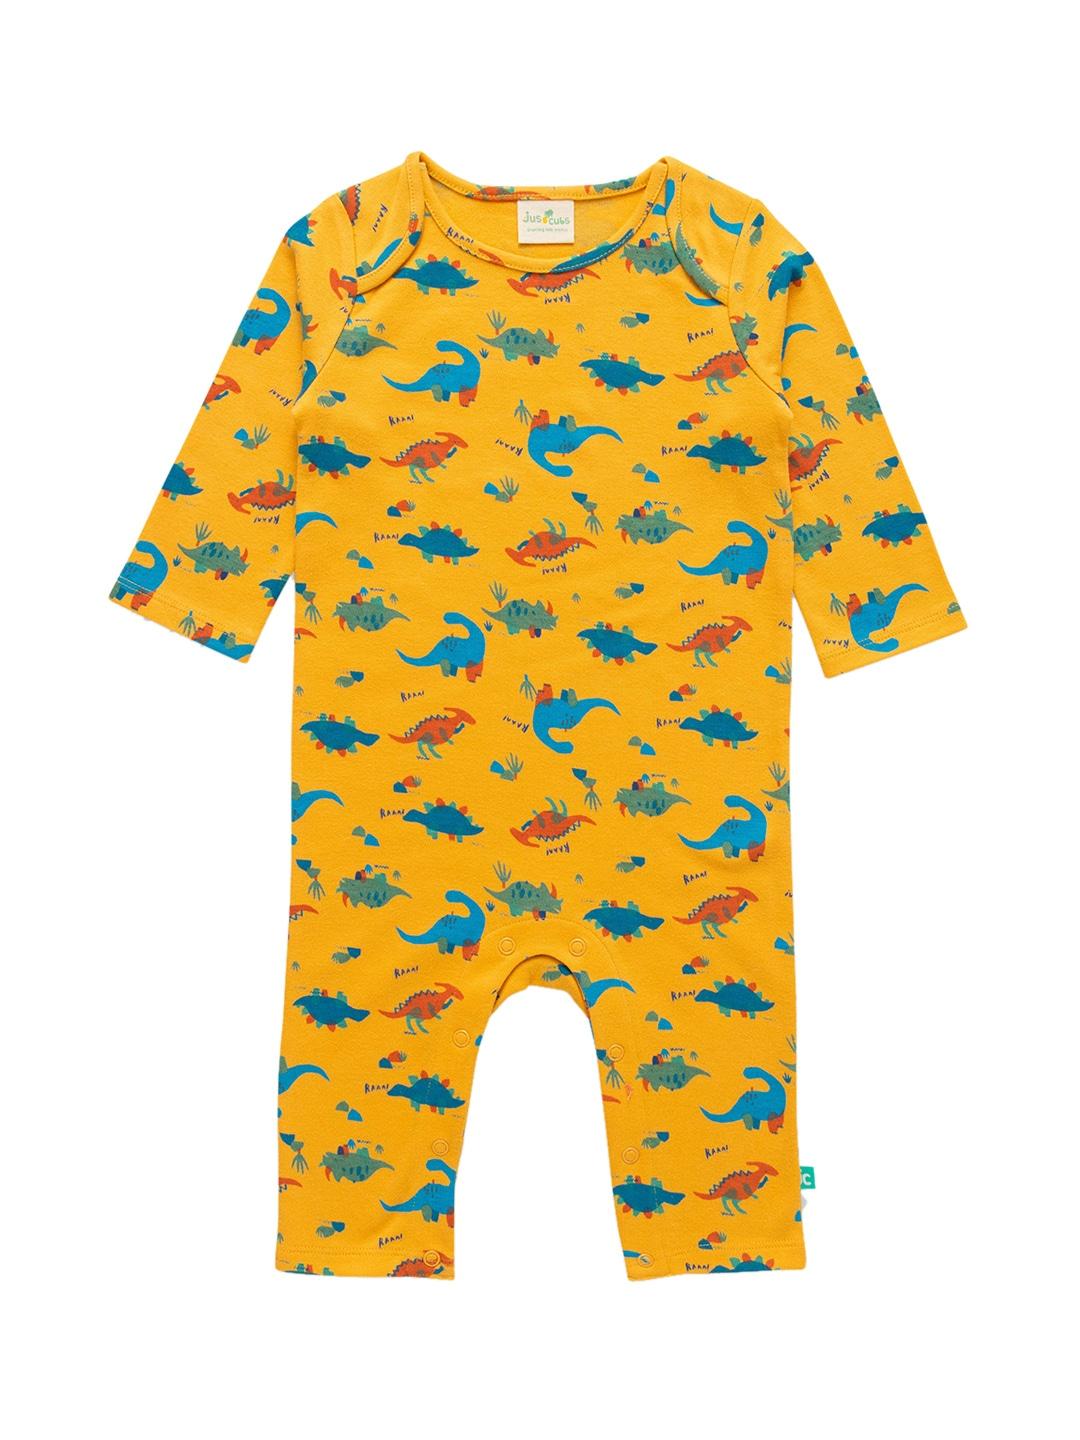 JusCubs Boys Graphic Printed Cotton Rompers